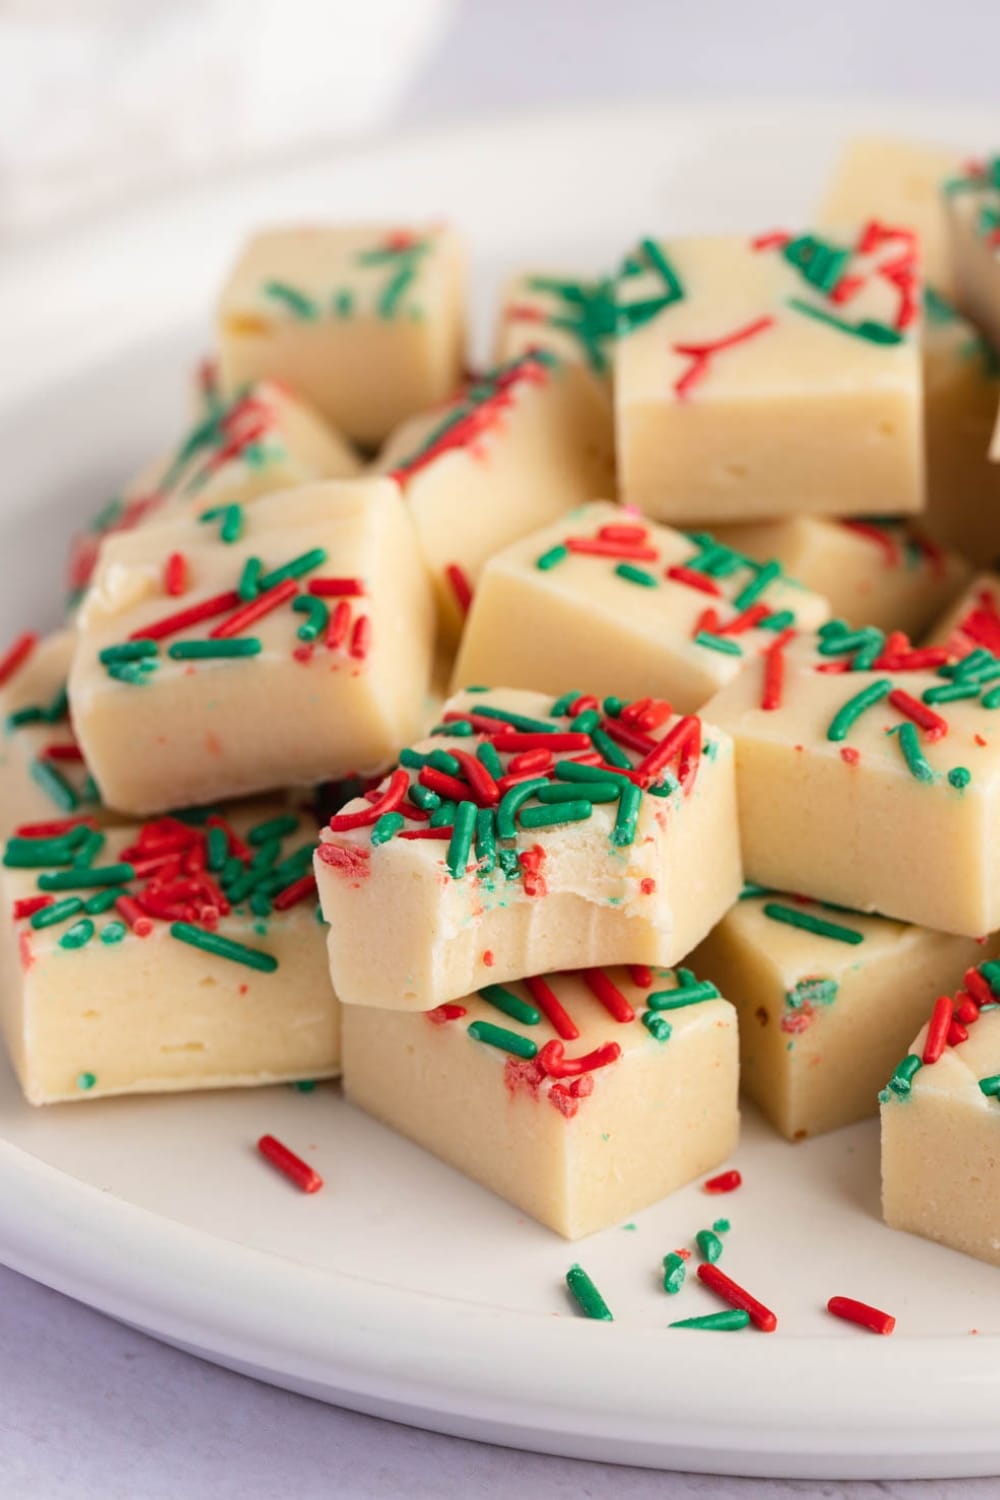 Cut in Cube Christmas Cookie Fudge with Sprinkled Candies